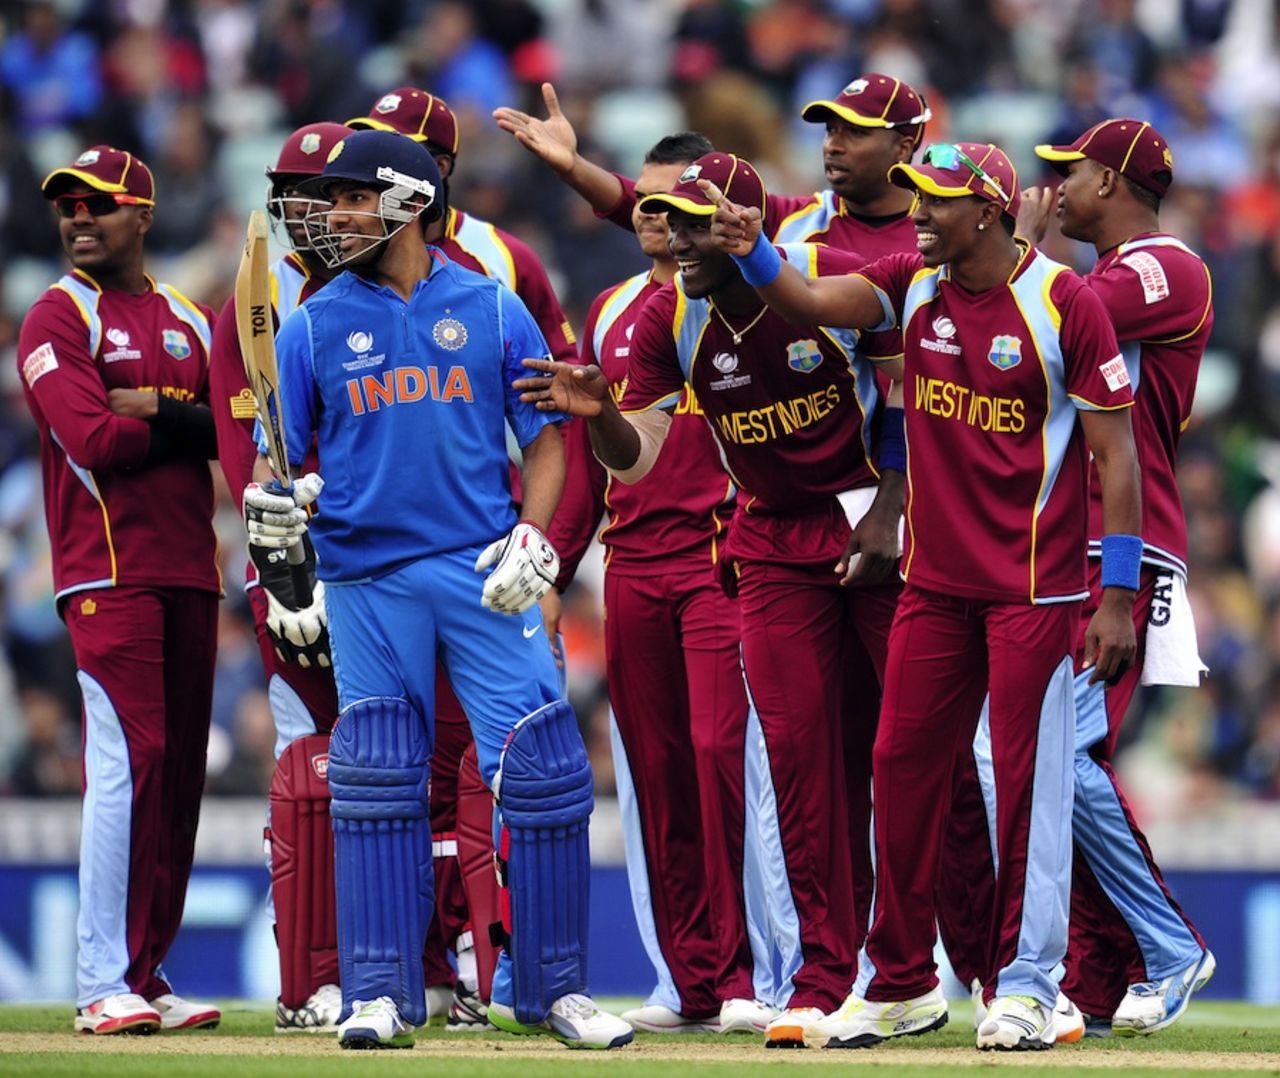 West Indies players joke with Rohit Sharma while waiting for the third umpire's decision, India v West Indies, Champions Trophy, Group B, The Oval, June 11, 2013